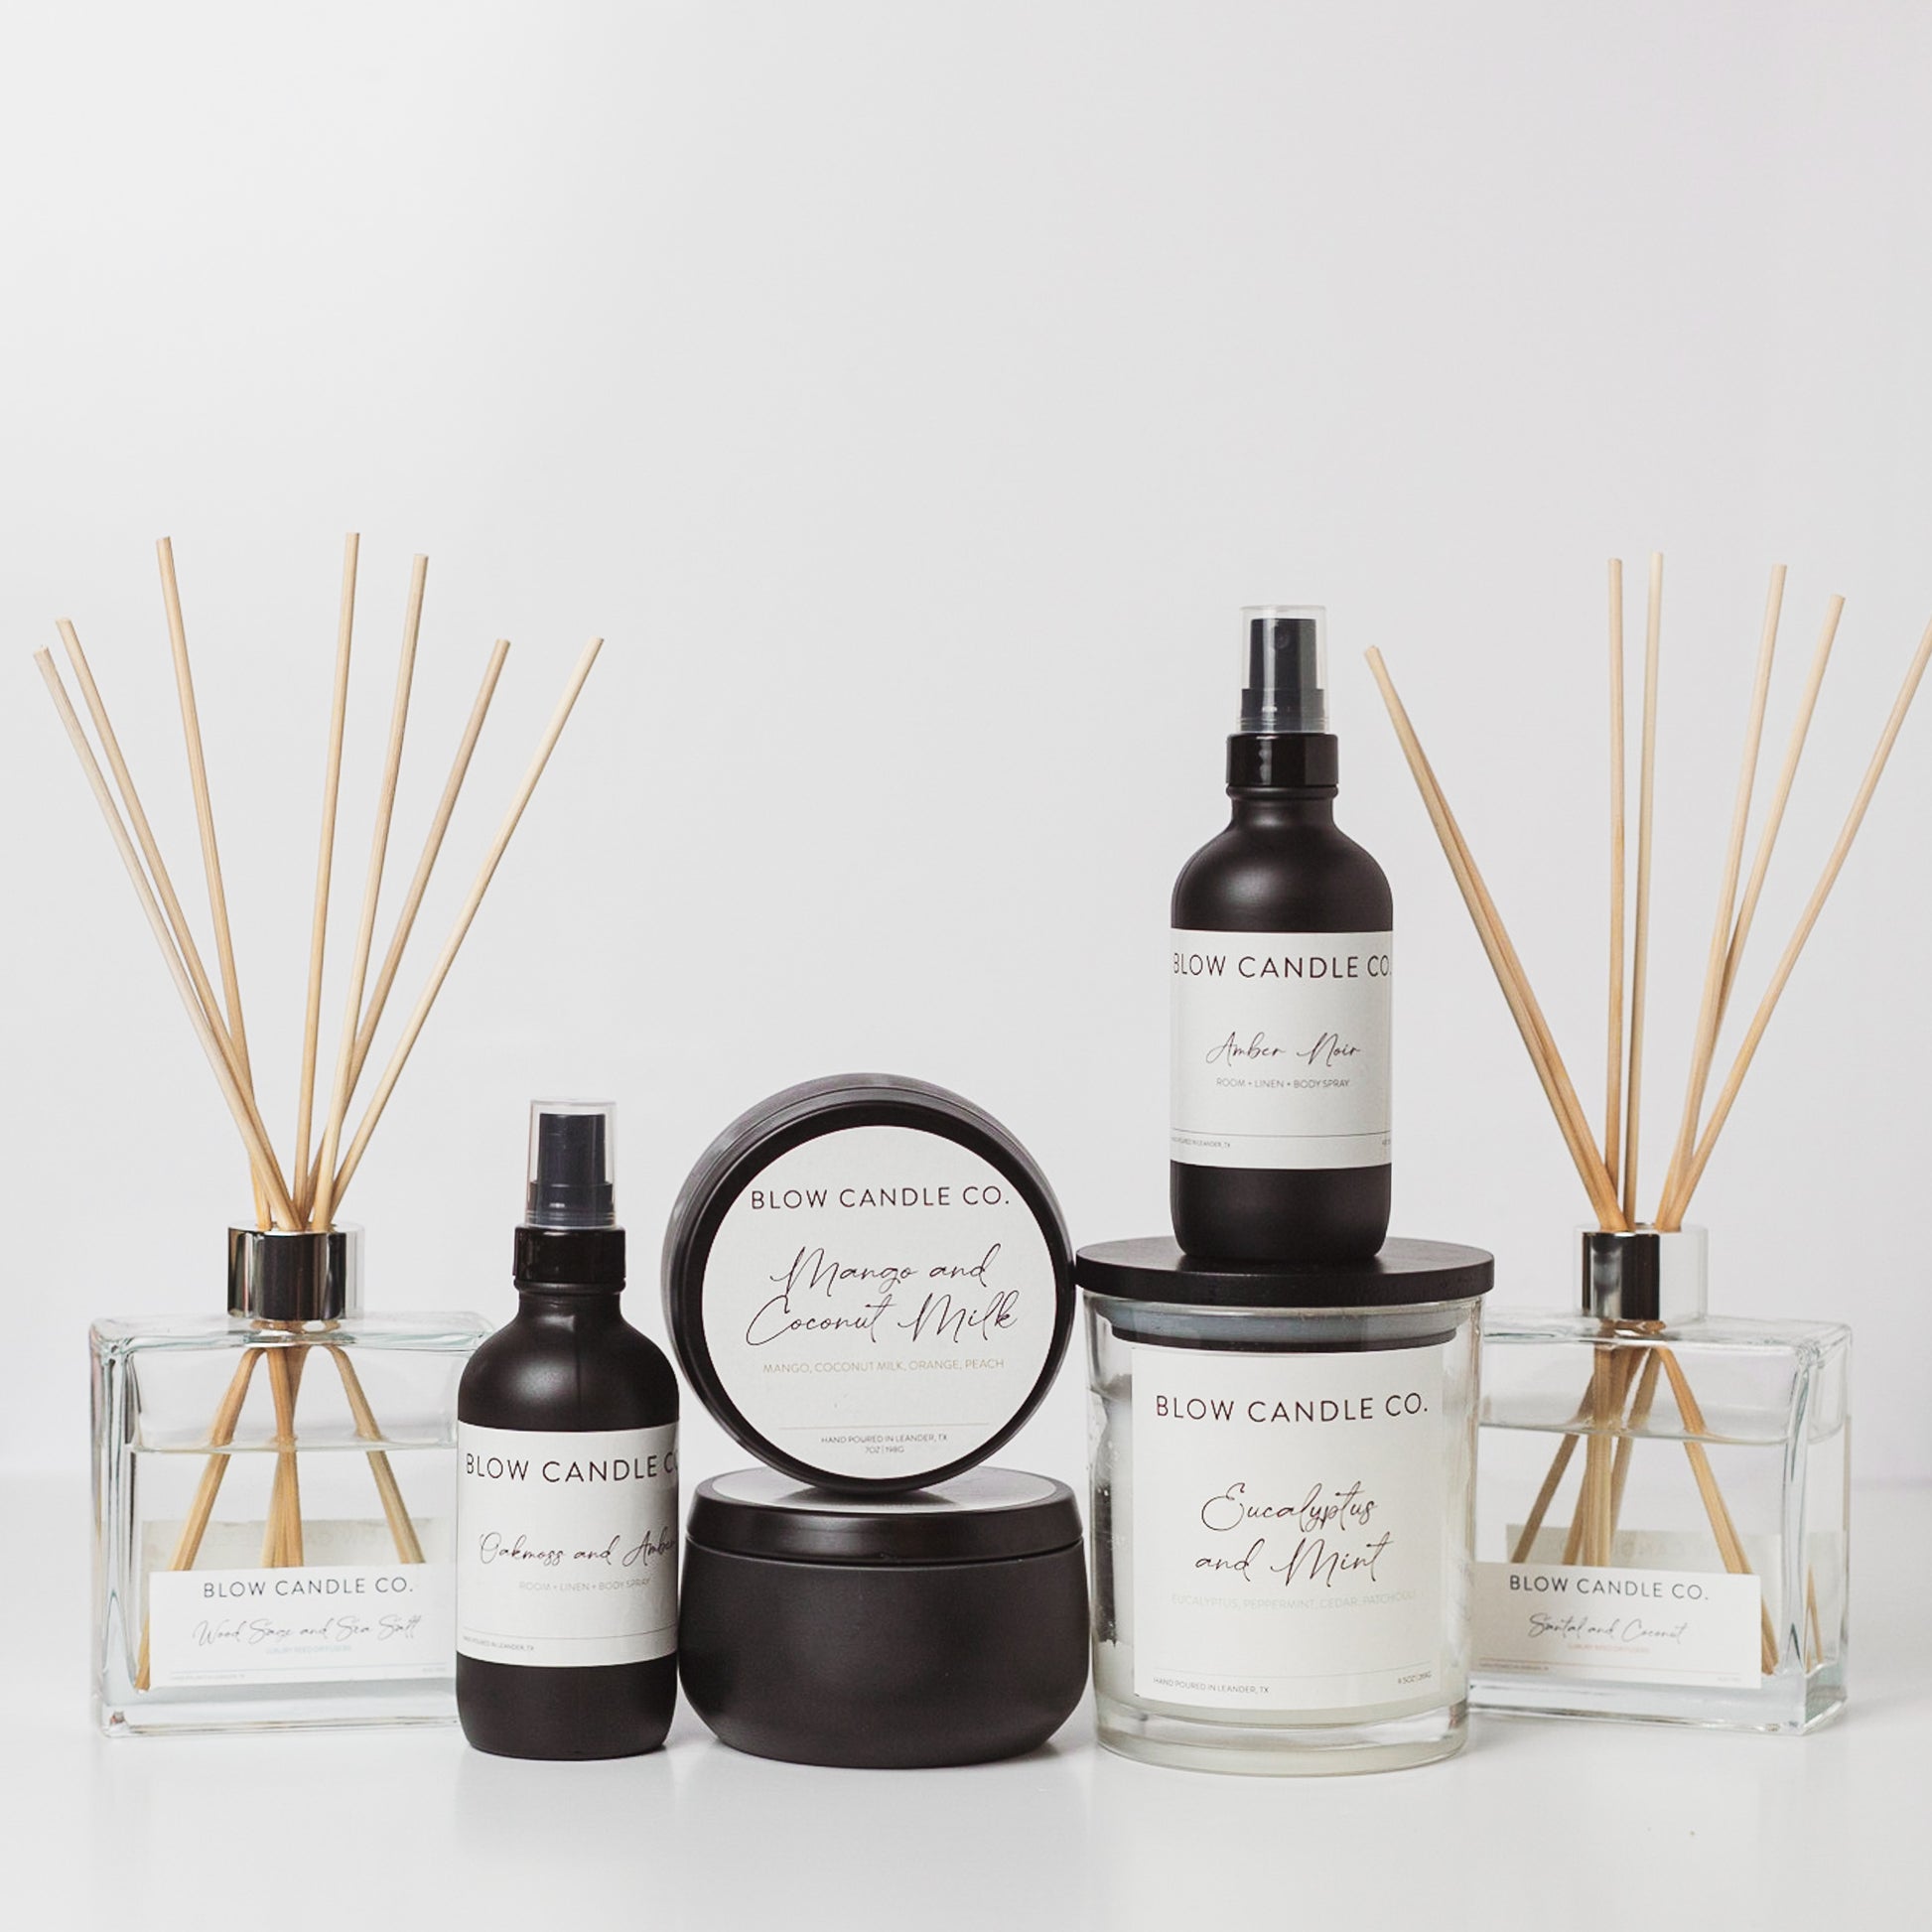 Diffuser Oils with Reeds: Long Lasting Fragrance – Sea Oats Candle Company